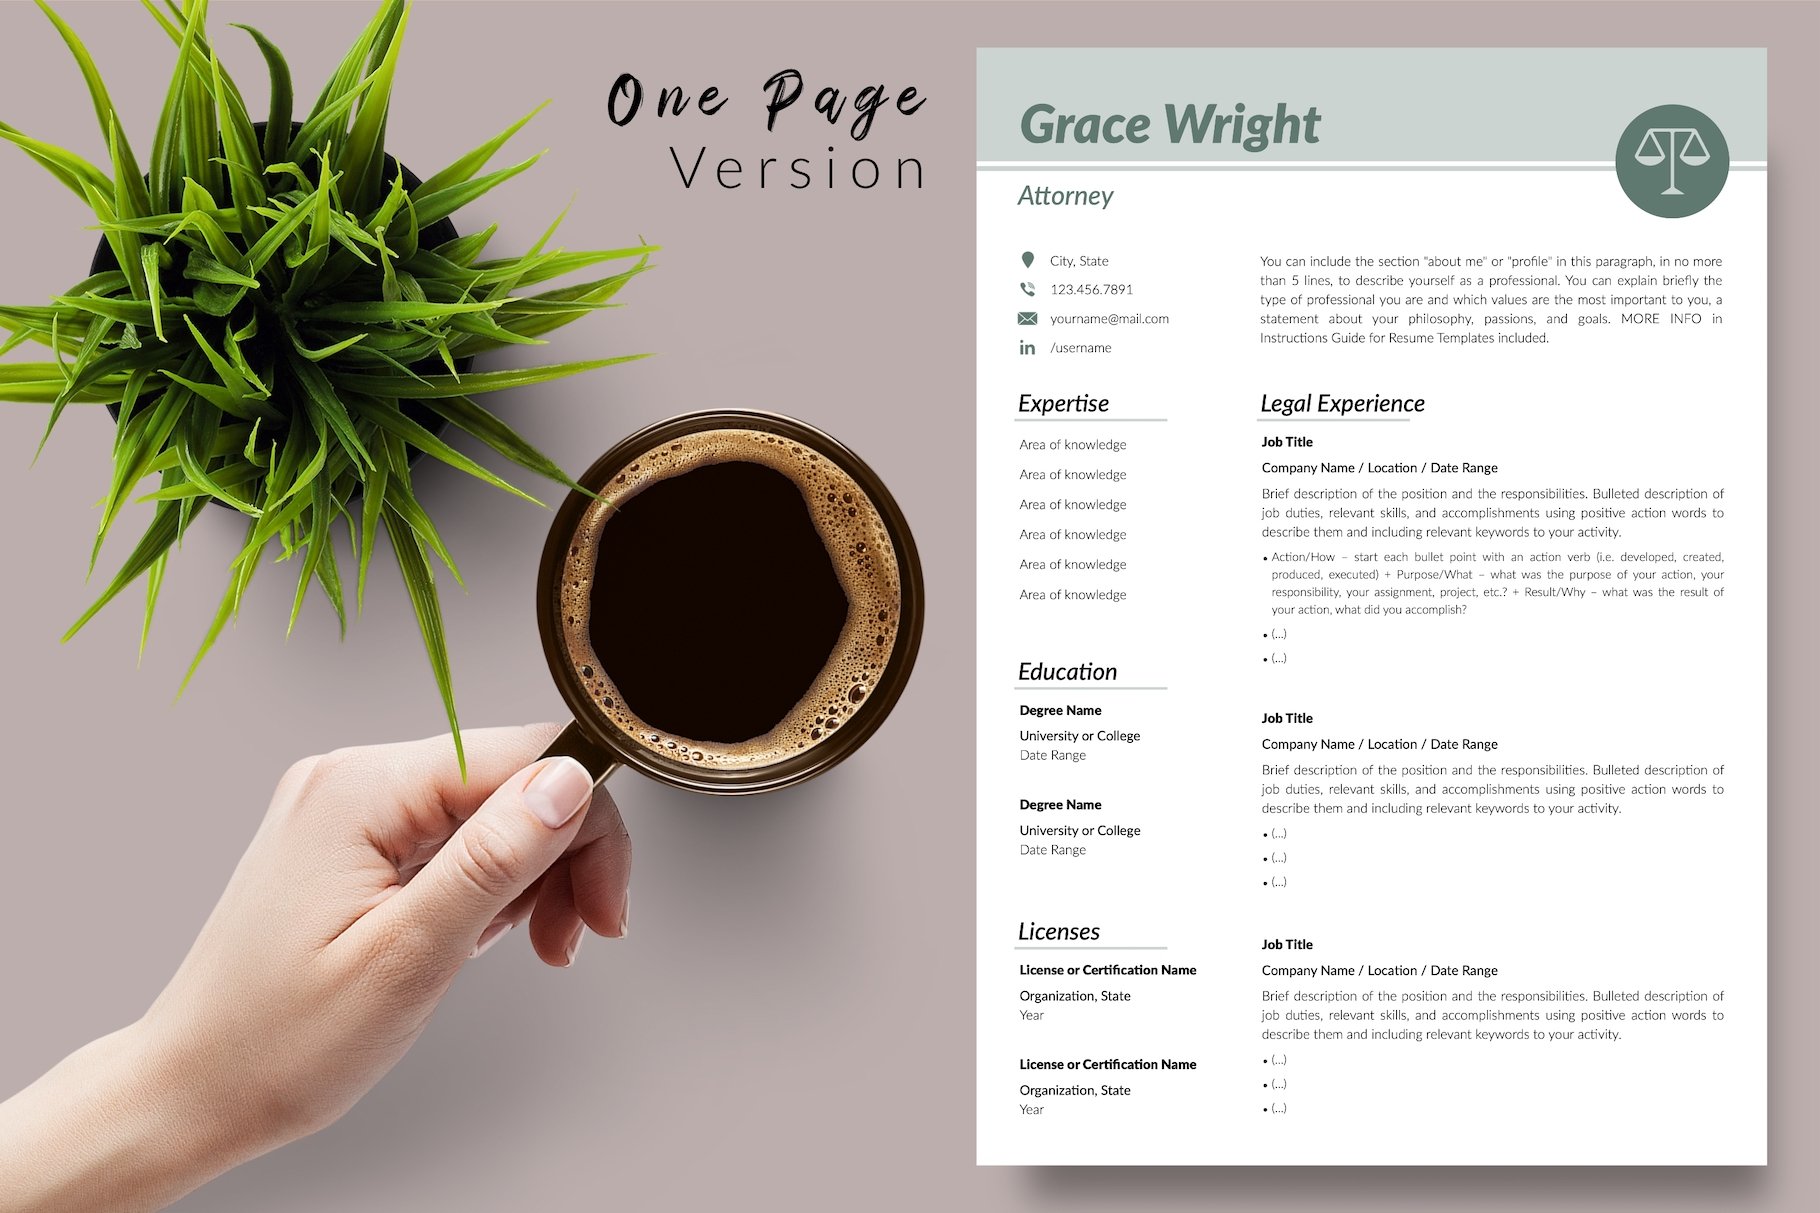 Attorney Resume Format / CV - Grace preview image.